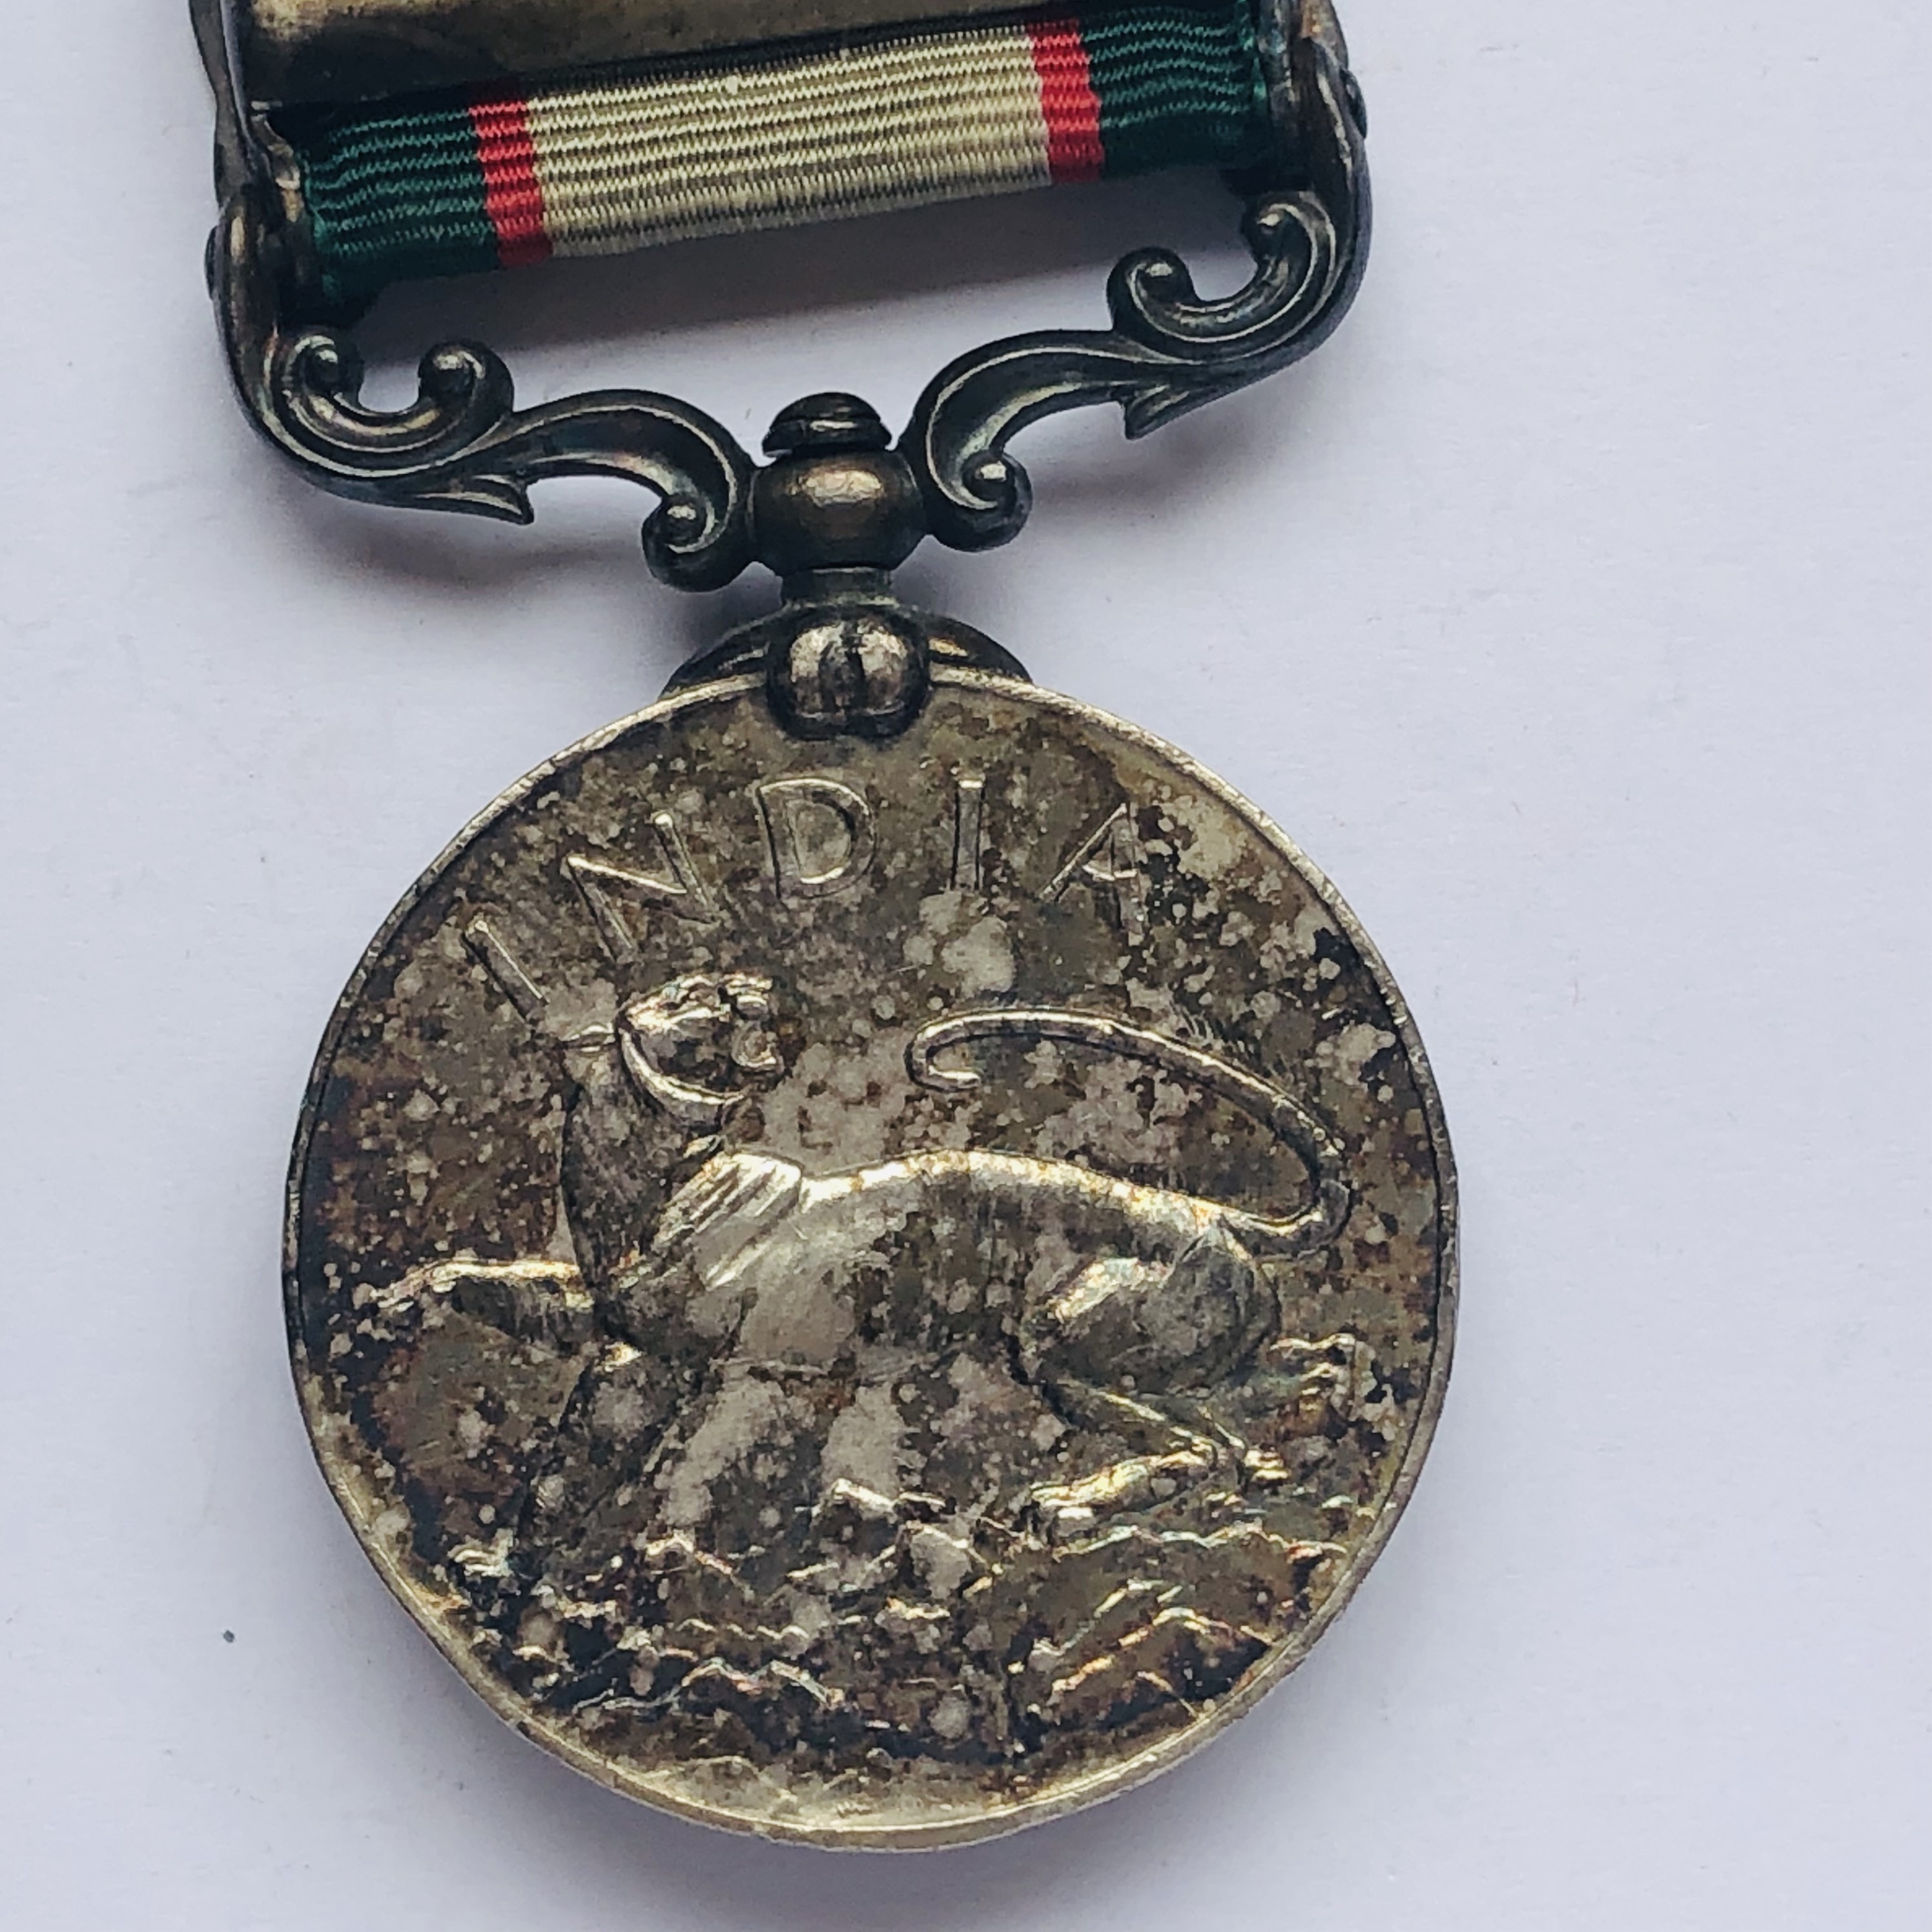 An India General Service Medal with North West Frontier 1936-37 clasp to 1395 Rfm Chandre Gurung, - Image 2 of 3